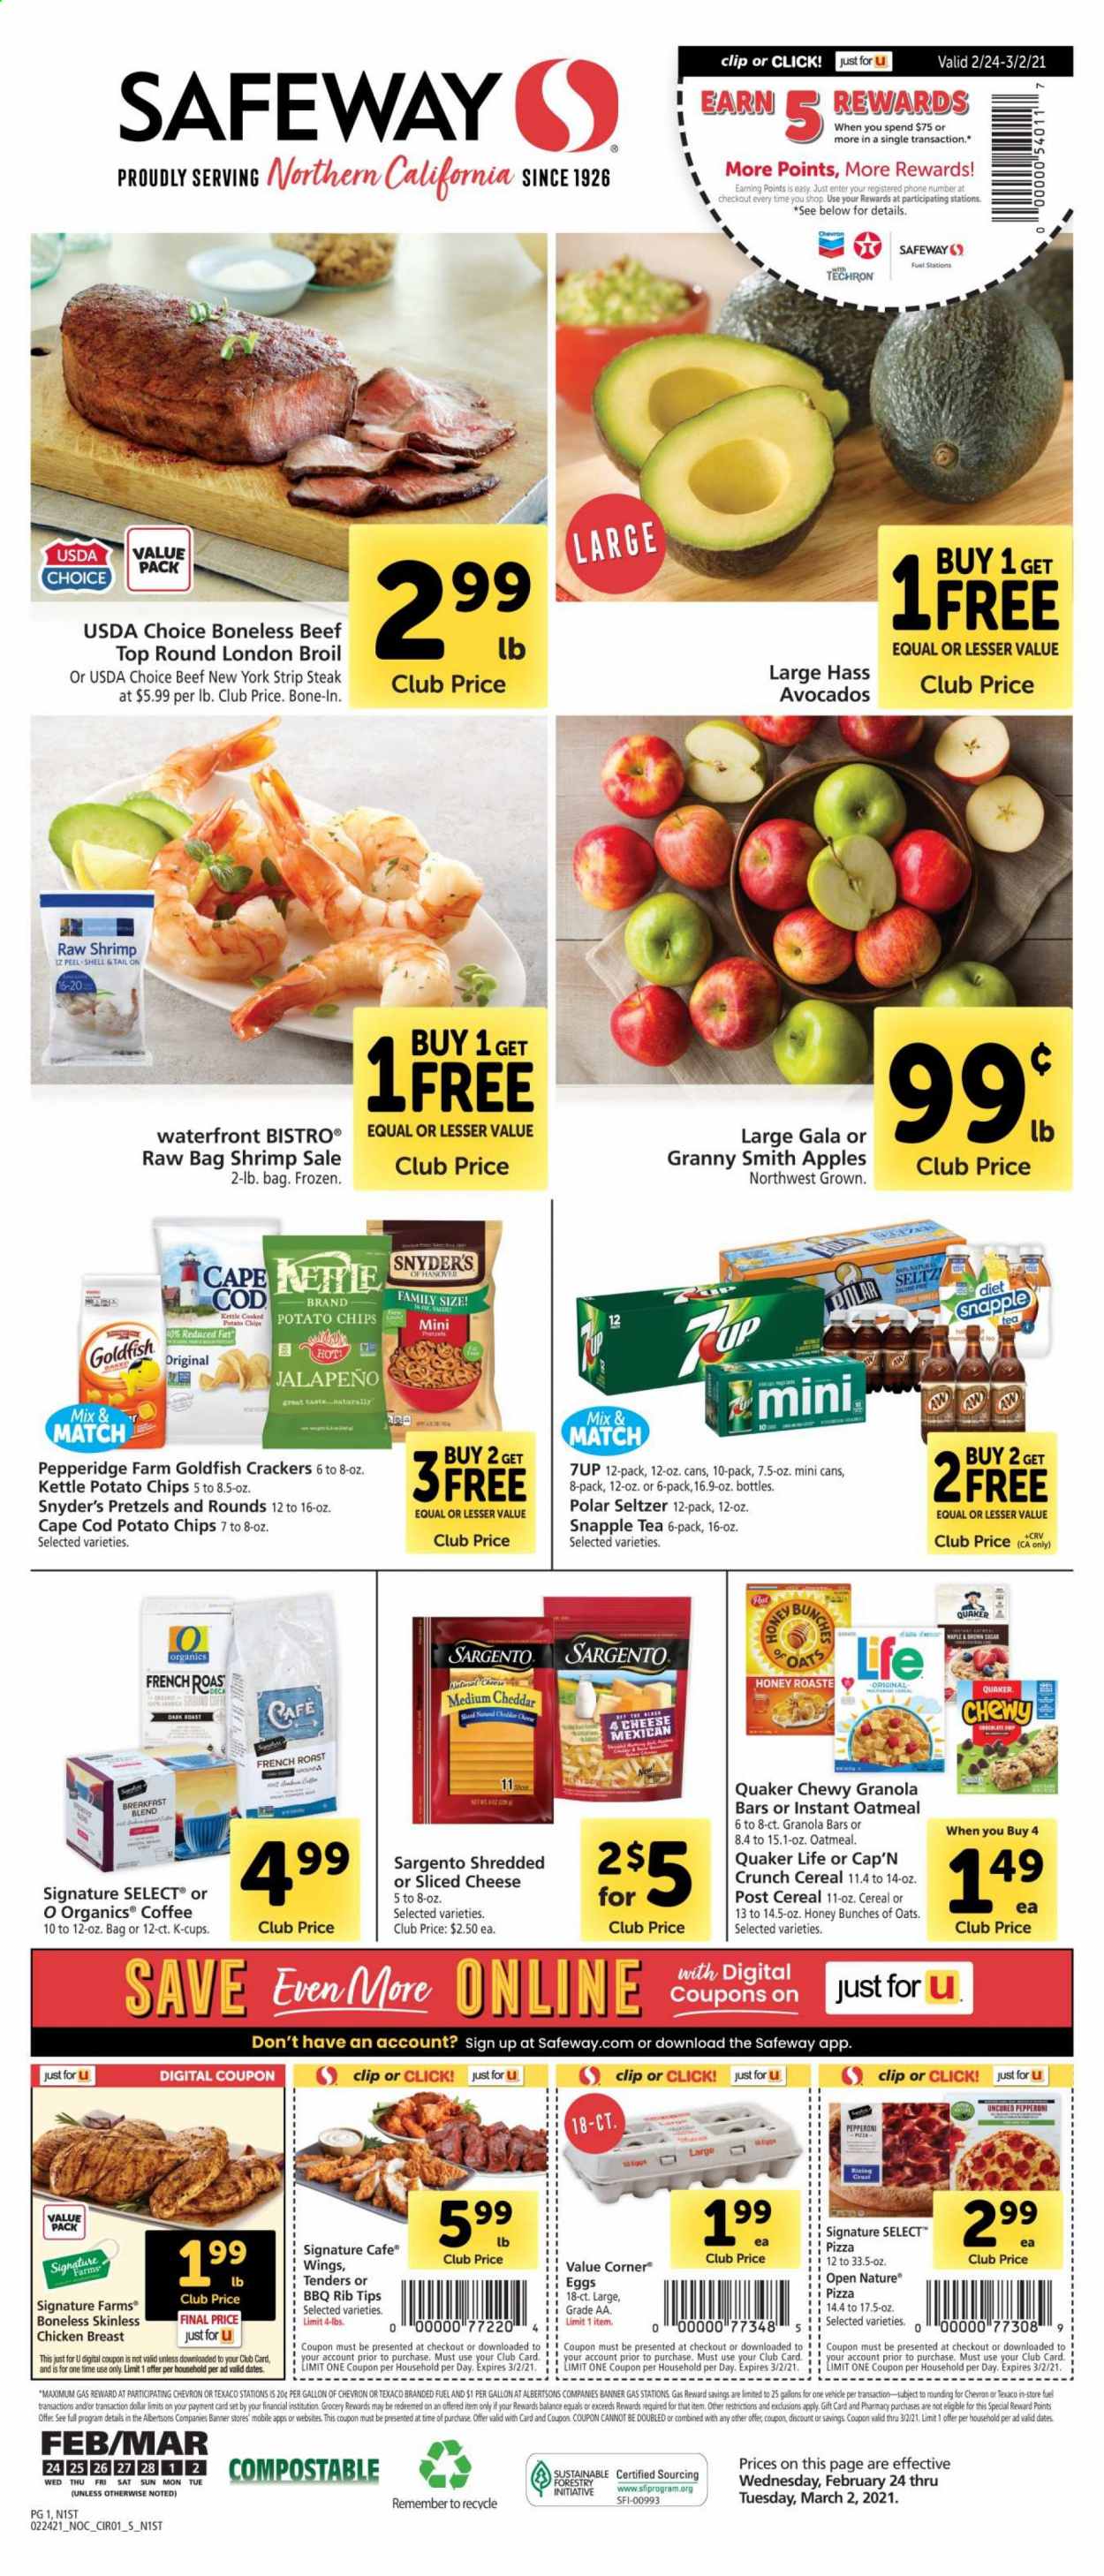 thumbnail - Safeway Flyer - 02/24/2021 - 03/02/2021 - Sales products - pretzels, apples, chicken breasts, beef meat, steak, striploin steak, cod, shrimps, pizza, Quaker, pepperoni, sliced cheese, cheddar, cheese, Sargento, eggs, crackers, potato chips, Goldfish, cane sugar, oatmeal, oats, jalapeño, cereals, granola bar, Cap'n Crunch, dried dates, 7UP, Snapple, seltzer water, tea, coffee, coffee capsules, K-Cups, breakfast blend, avocado, Gala. Page 1.